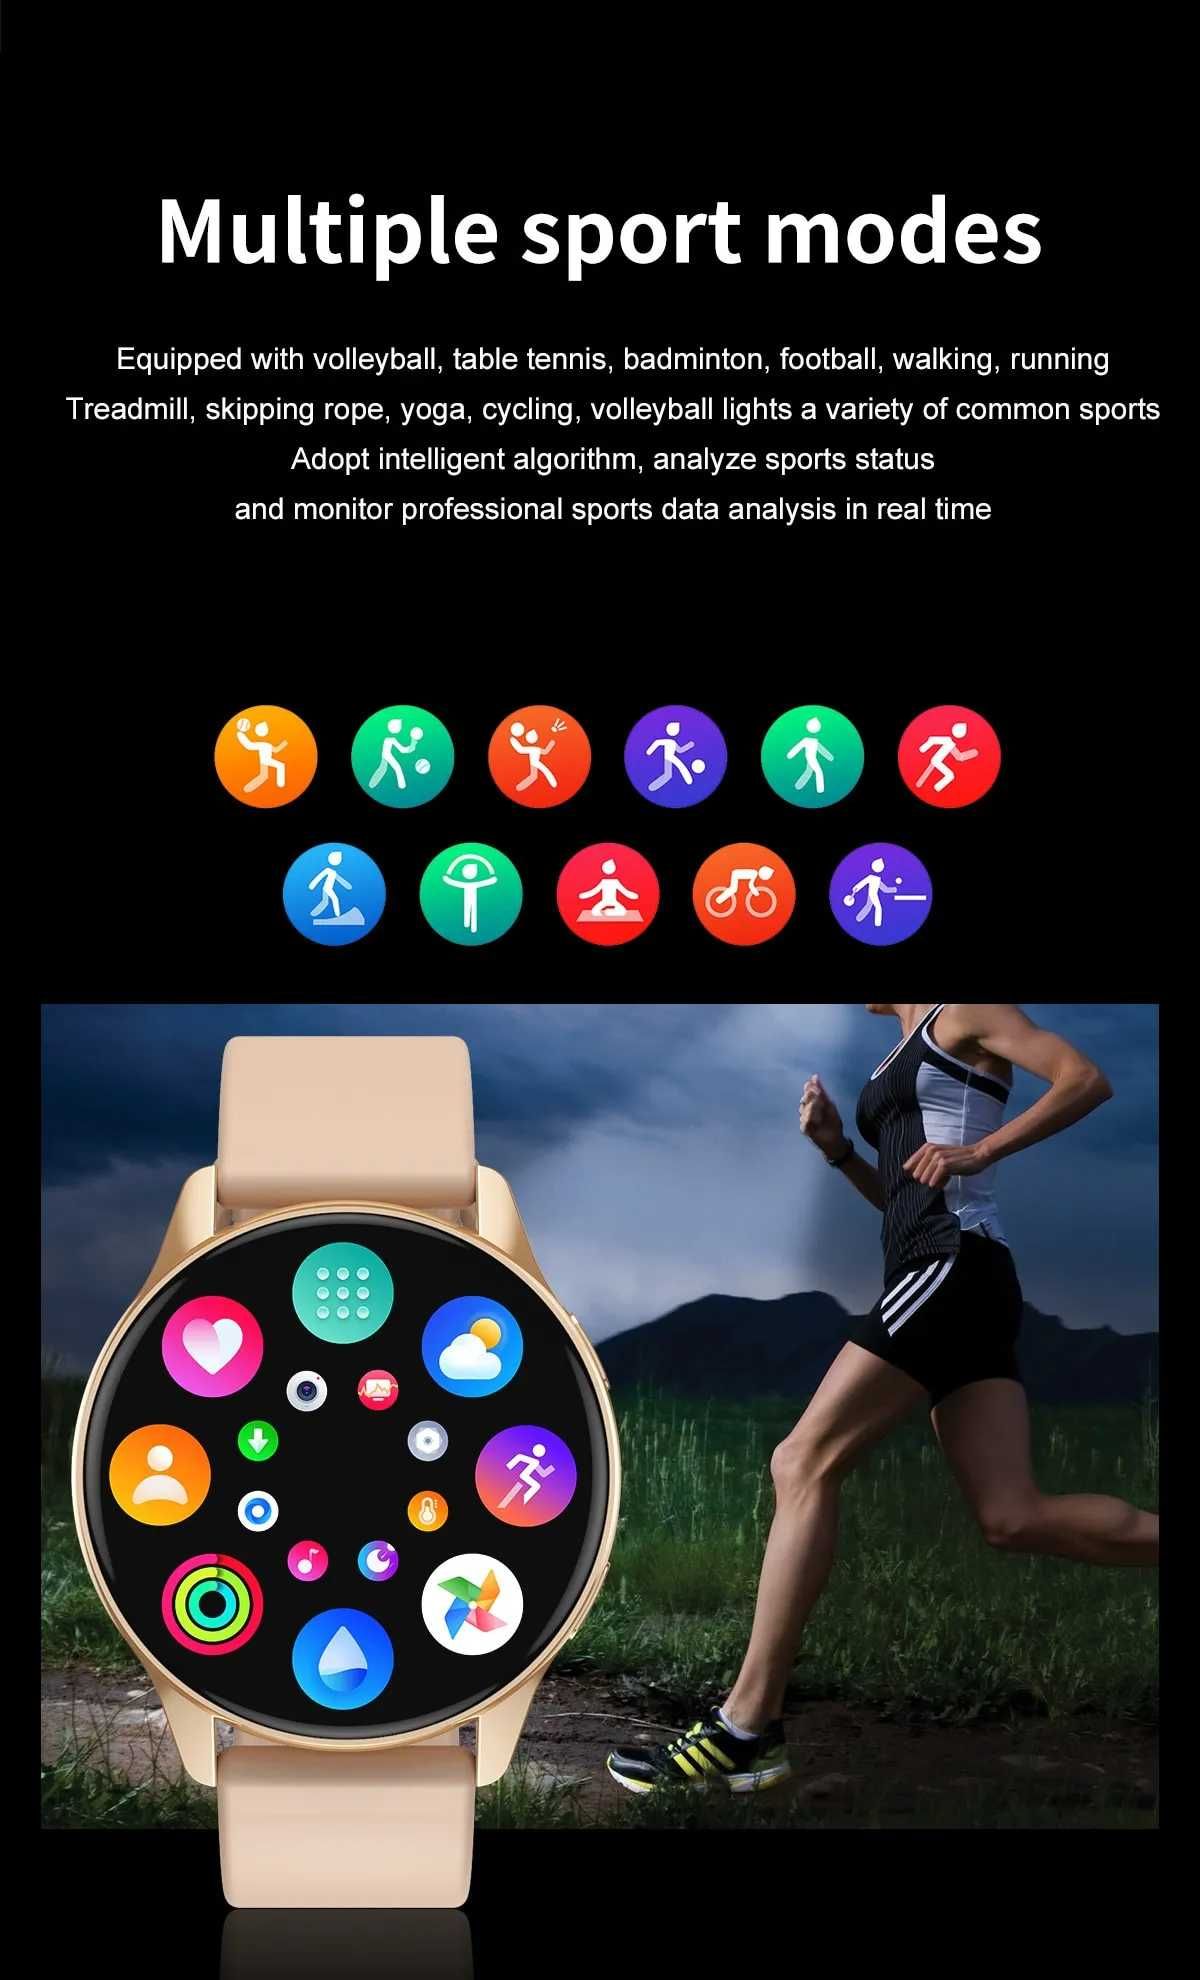 Huawei Style Smartwatch T2Pro,Смарт часовник,Фитнес гривна,IOS Android